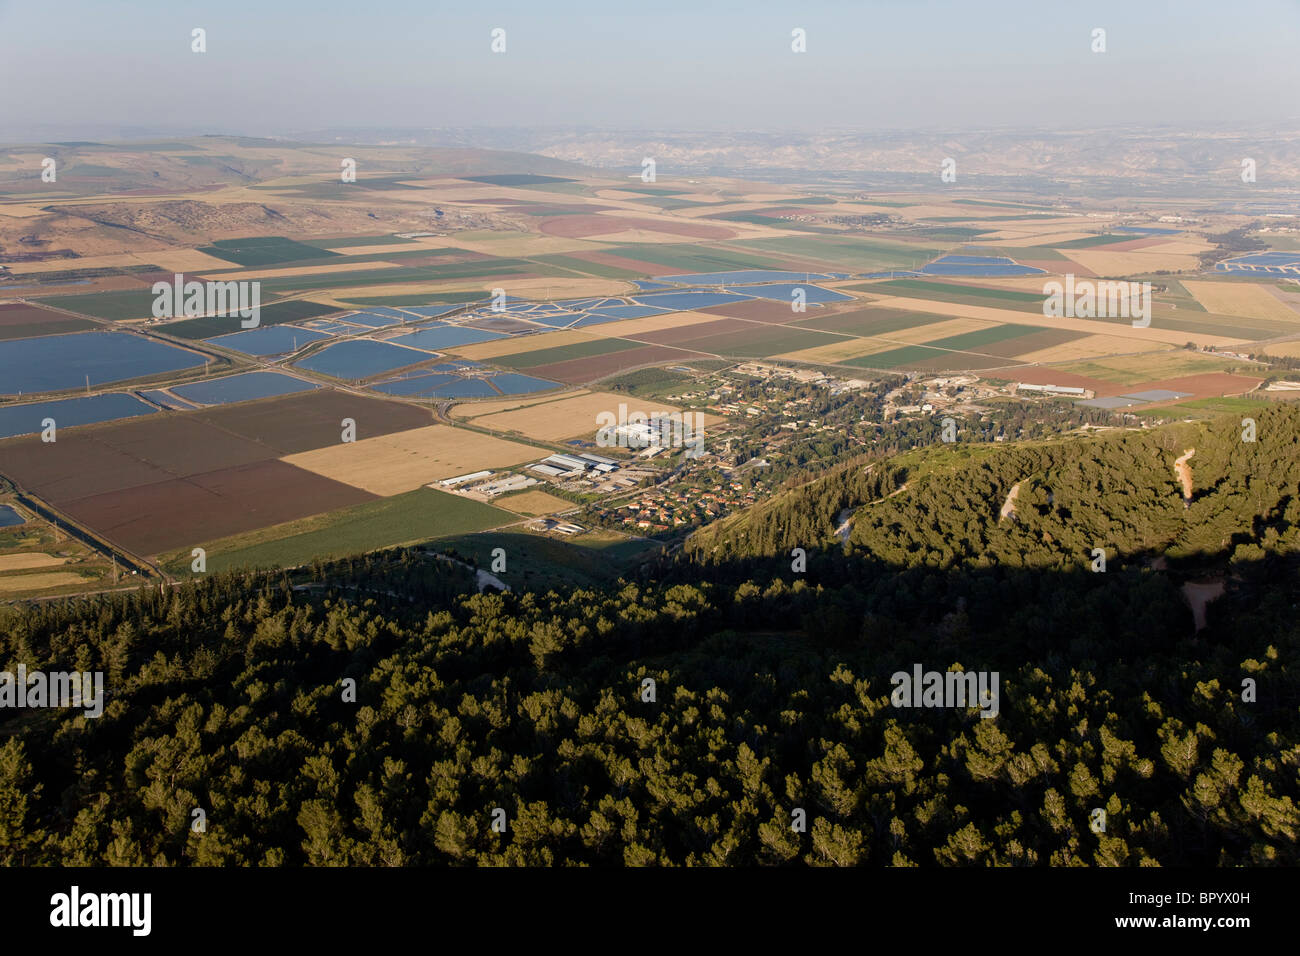 Aerial photograph of the agriculture fields of the Jezreel valley Stock Photo